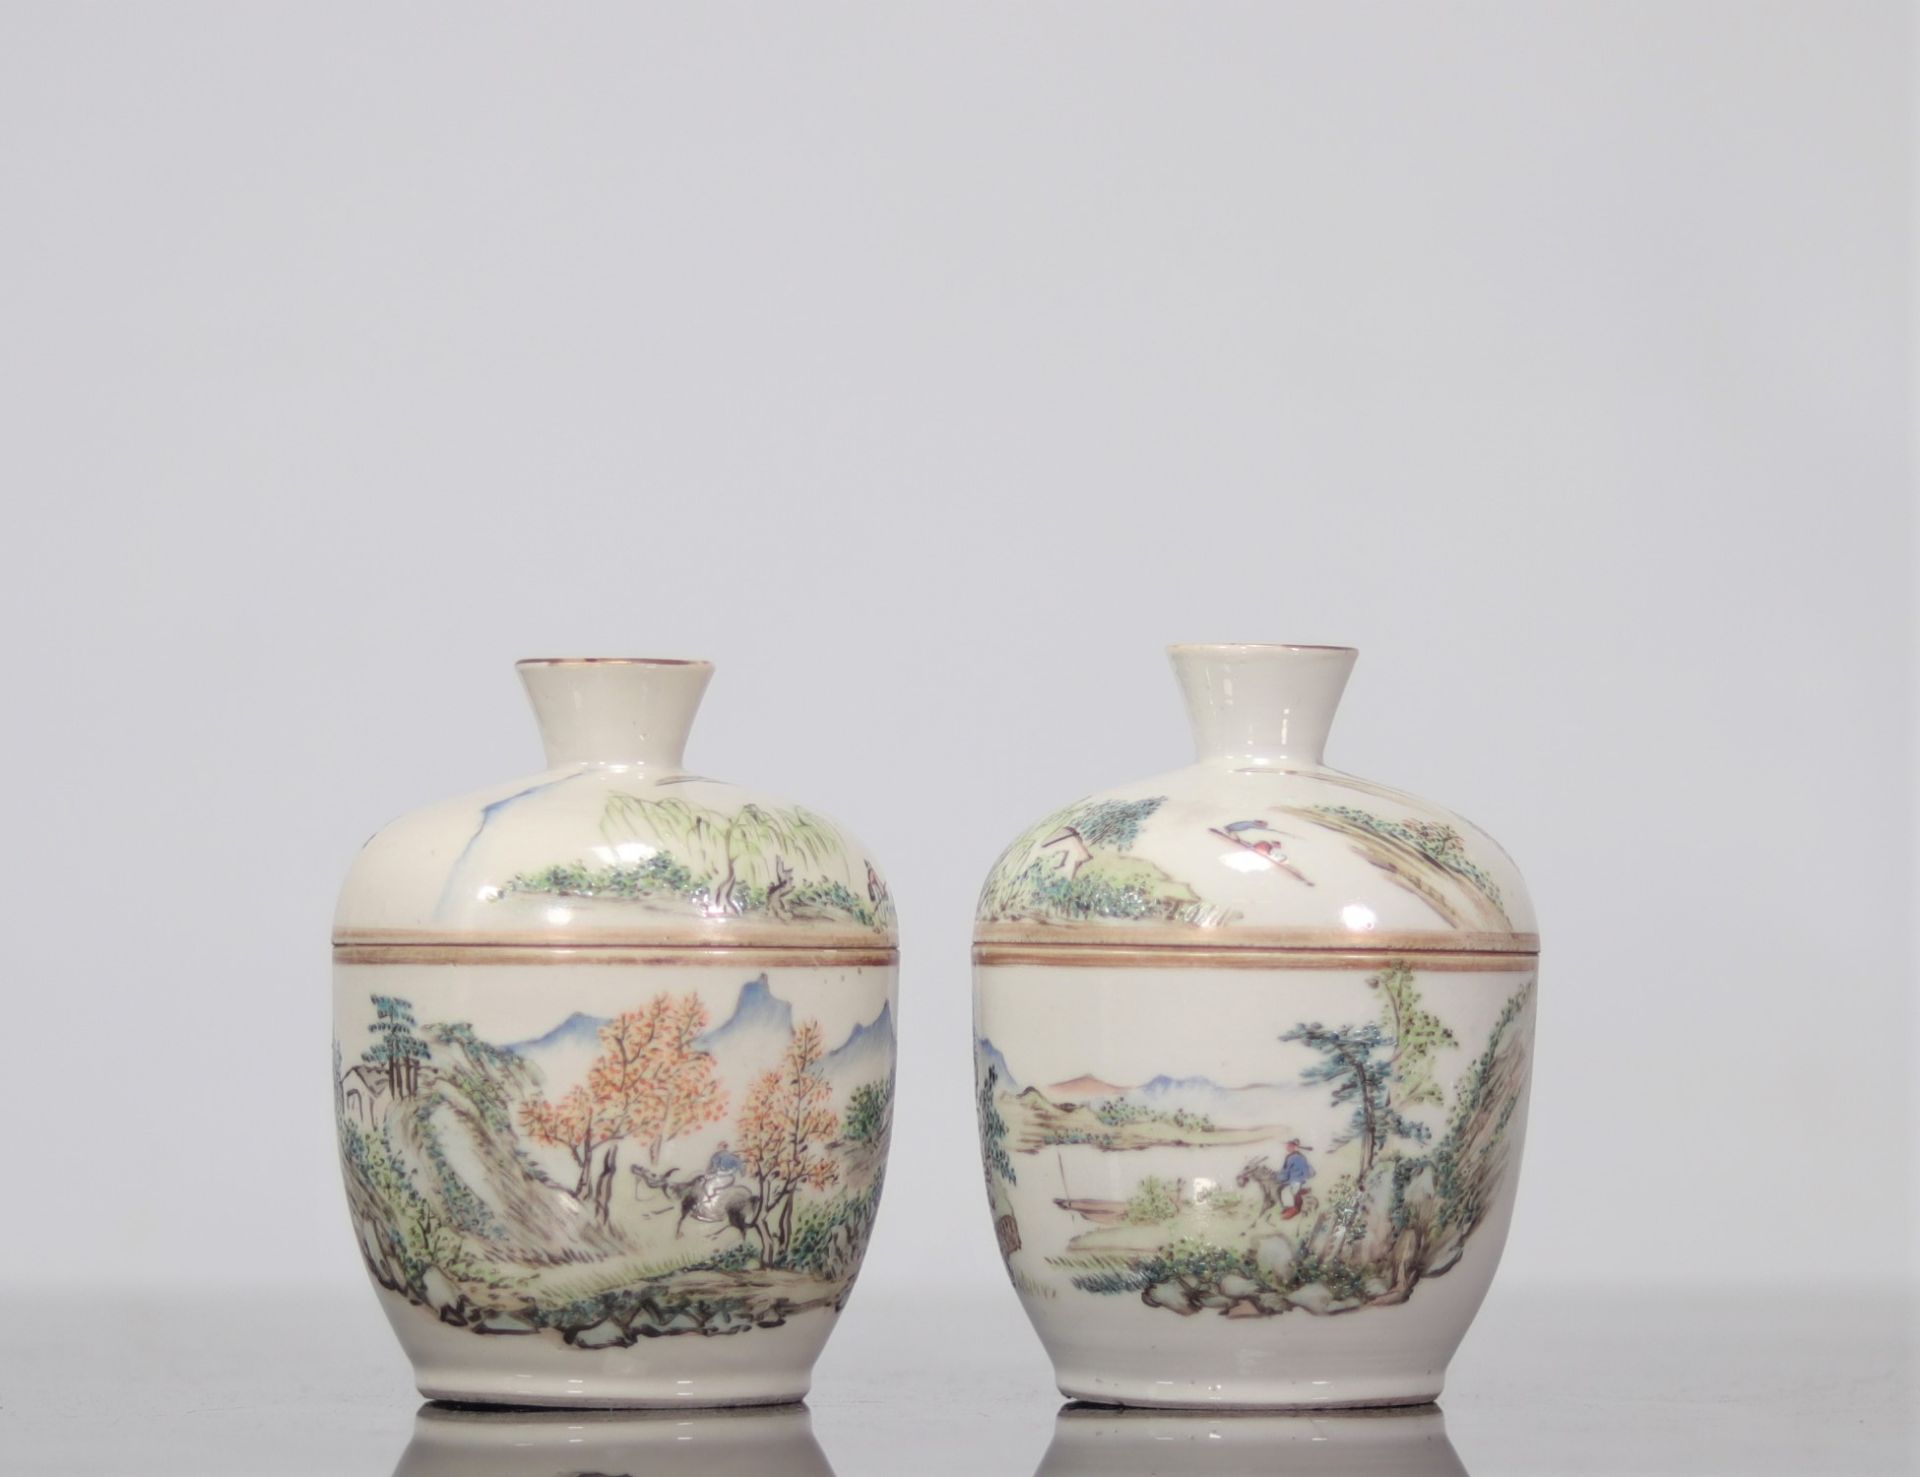 Pair of porcelain covered bowls decorated with landscape